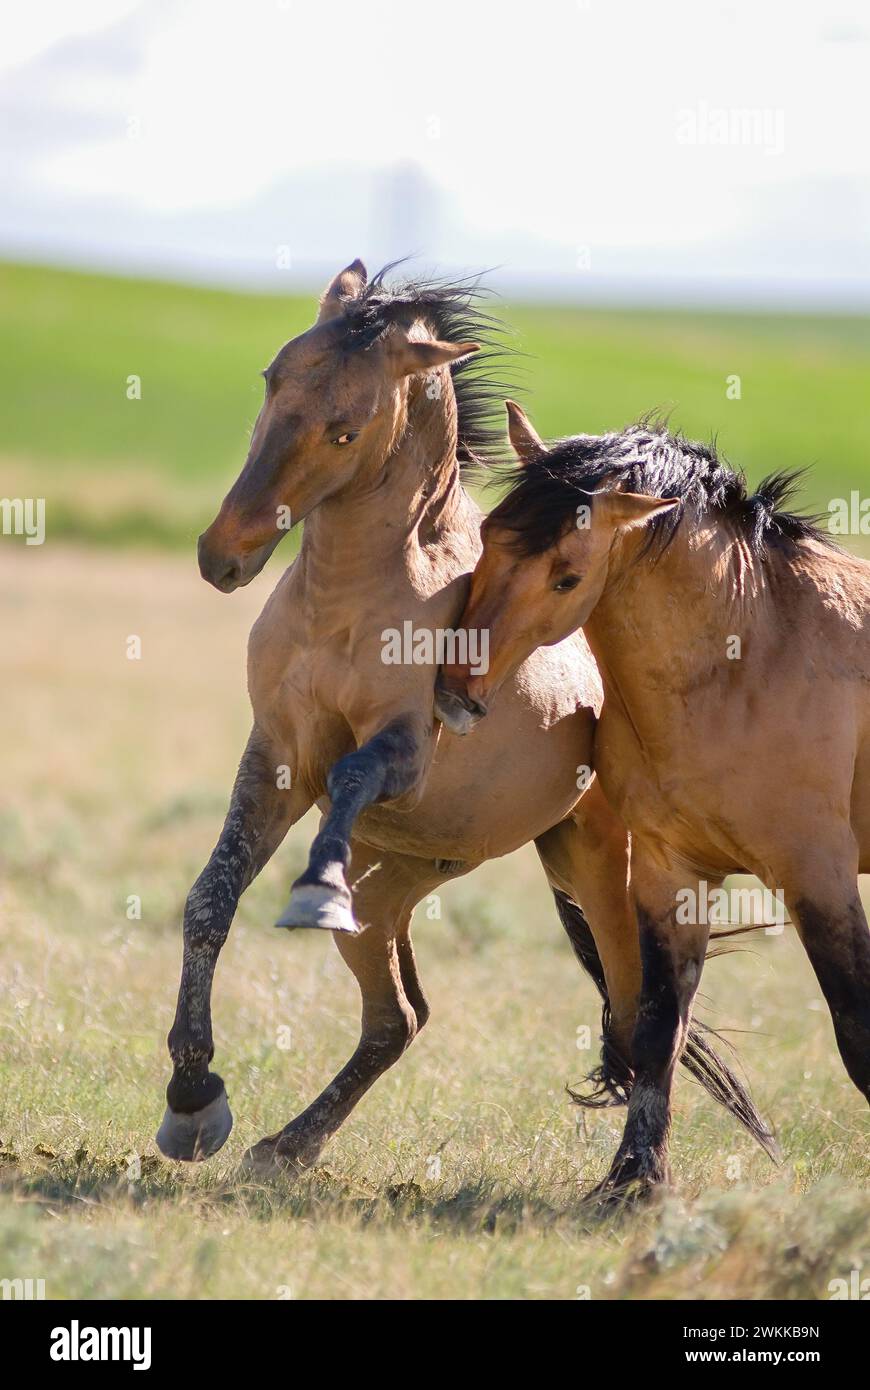 Two Ghila horse stallions fighting against one another or playing being aggressive in communication black manes flying in outdoor field one horse rear Stock Photo